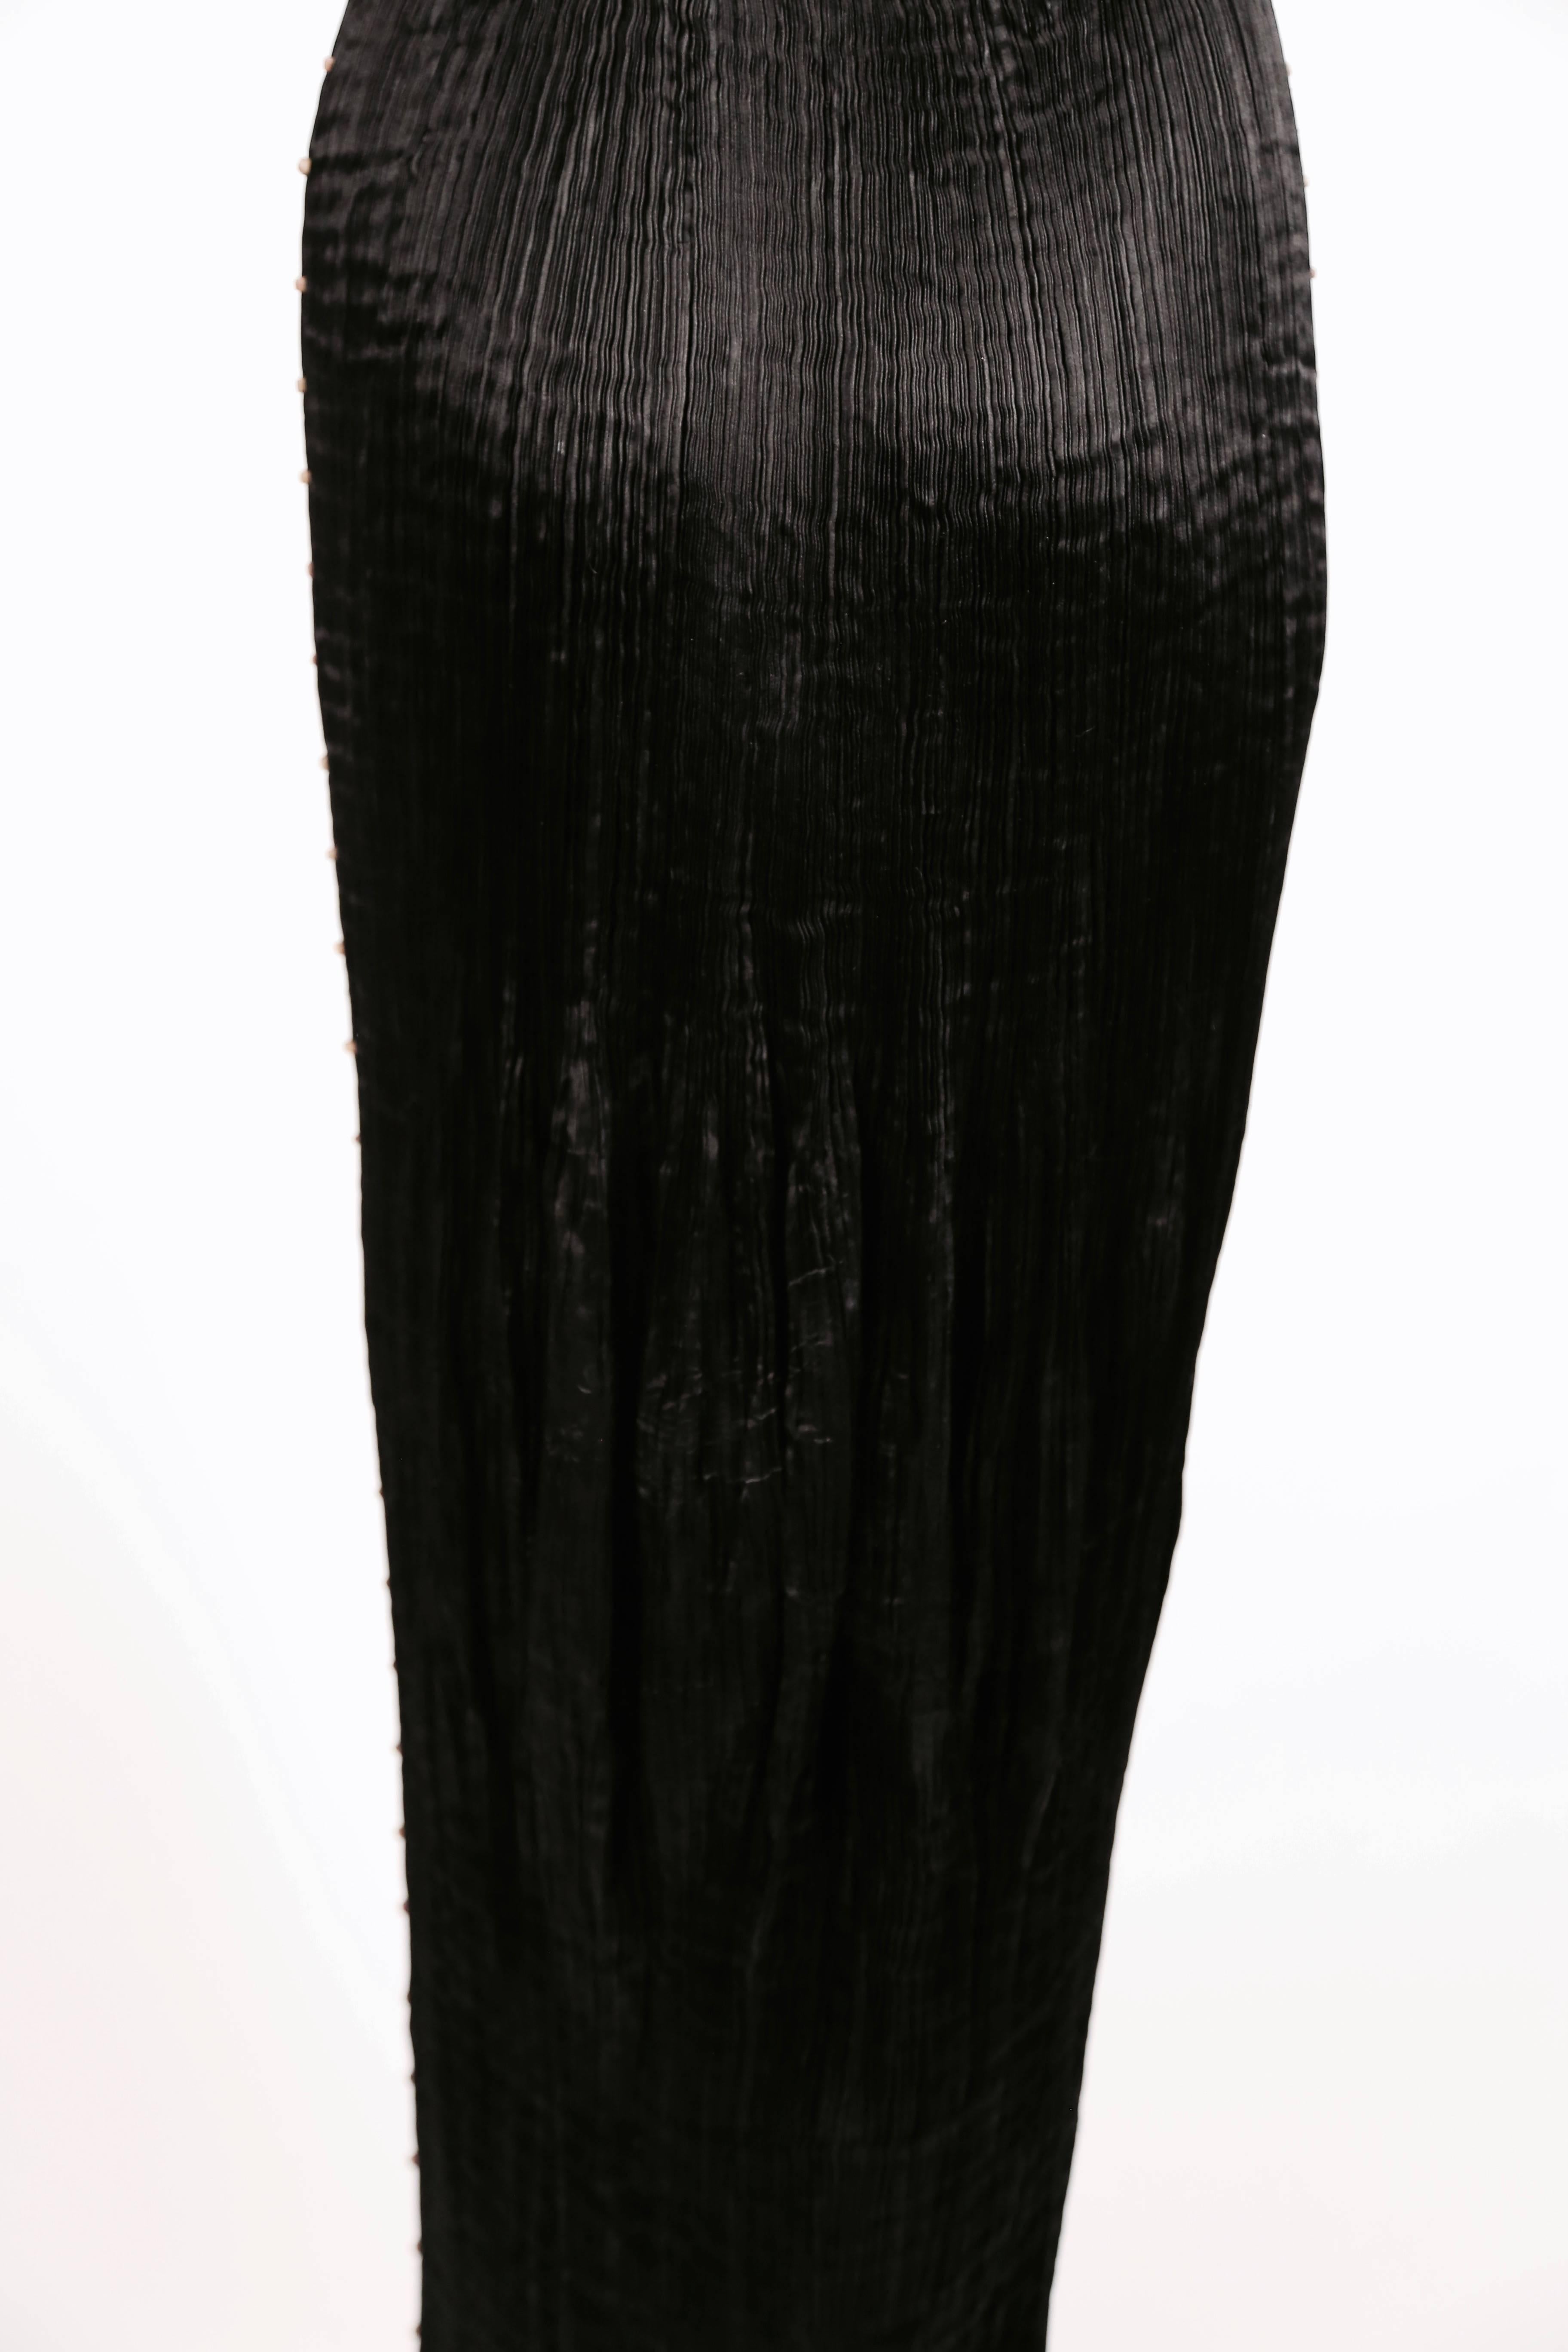 Black 1920's MARIANO FORTUNY pleated black silk DELPHOS gown